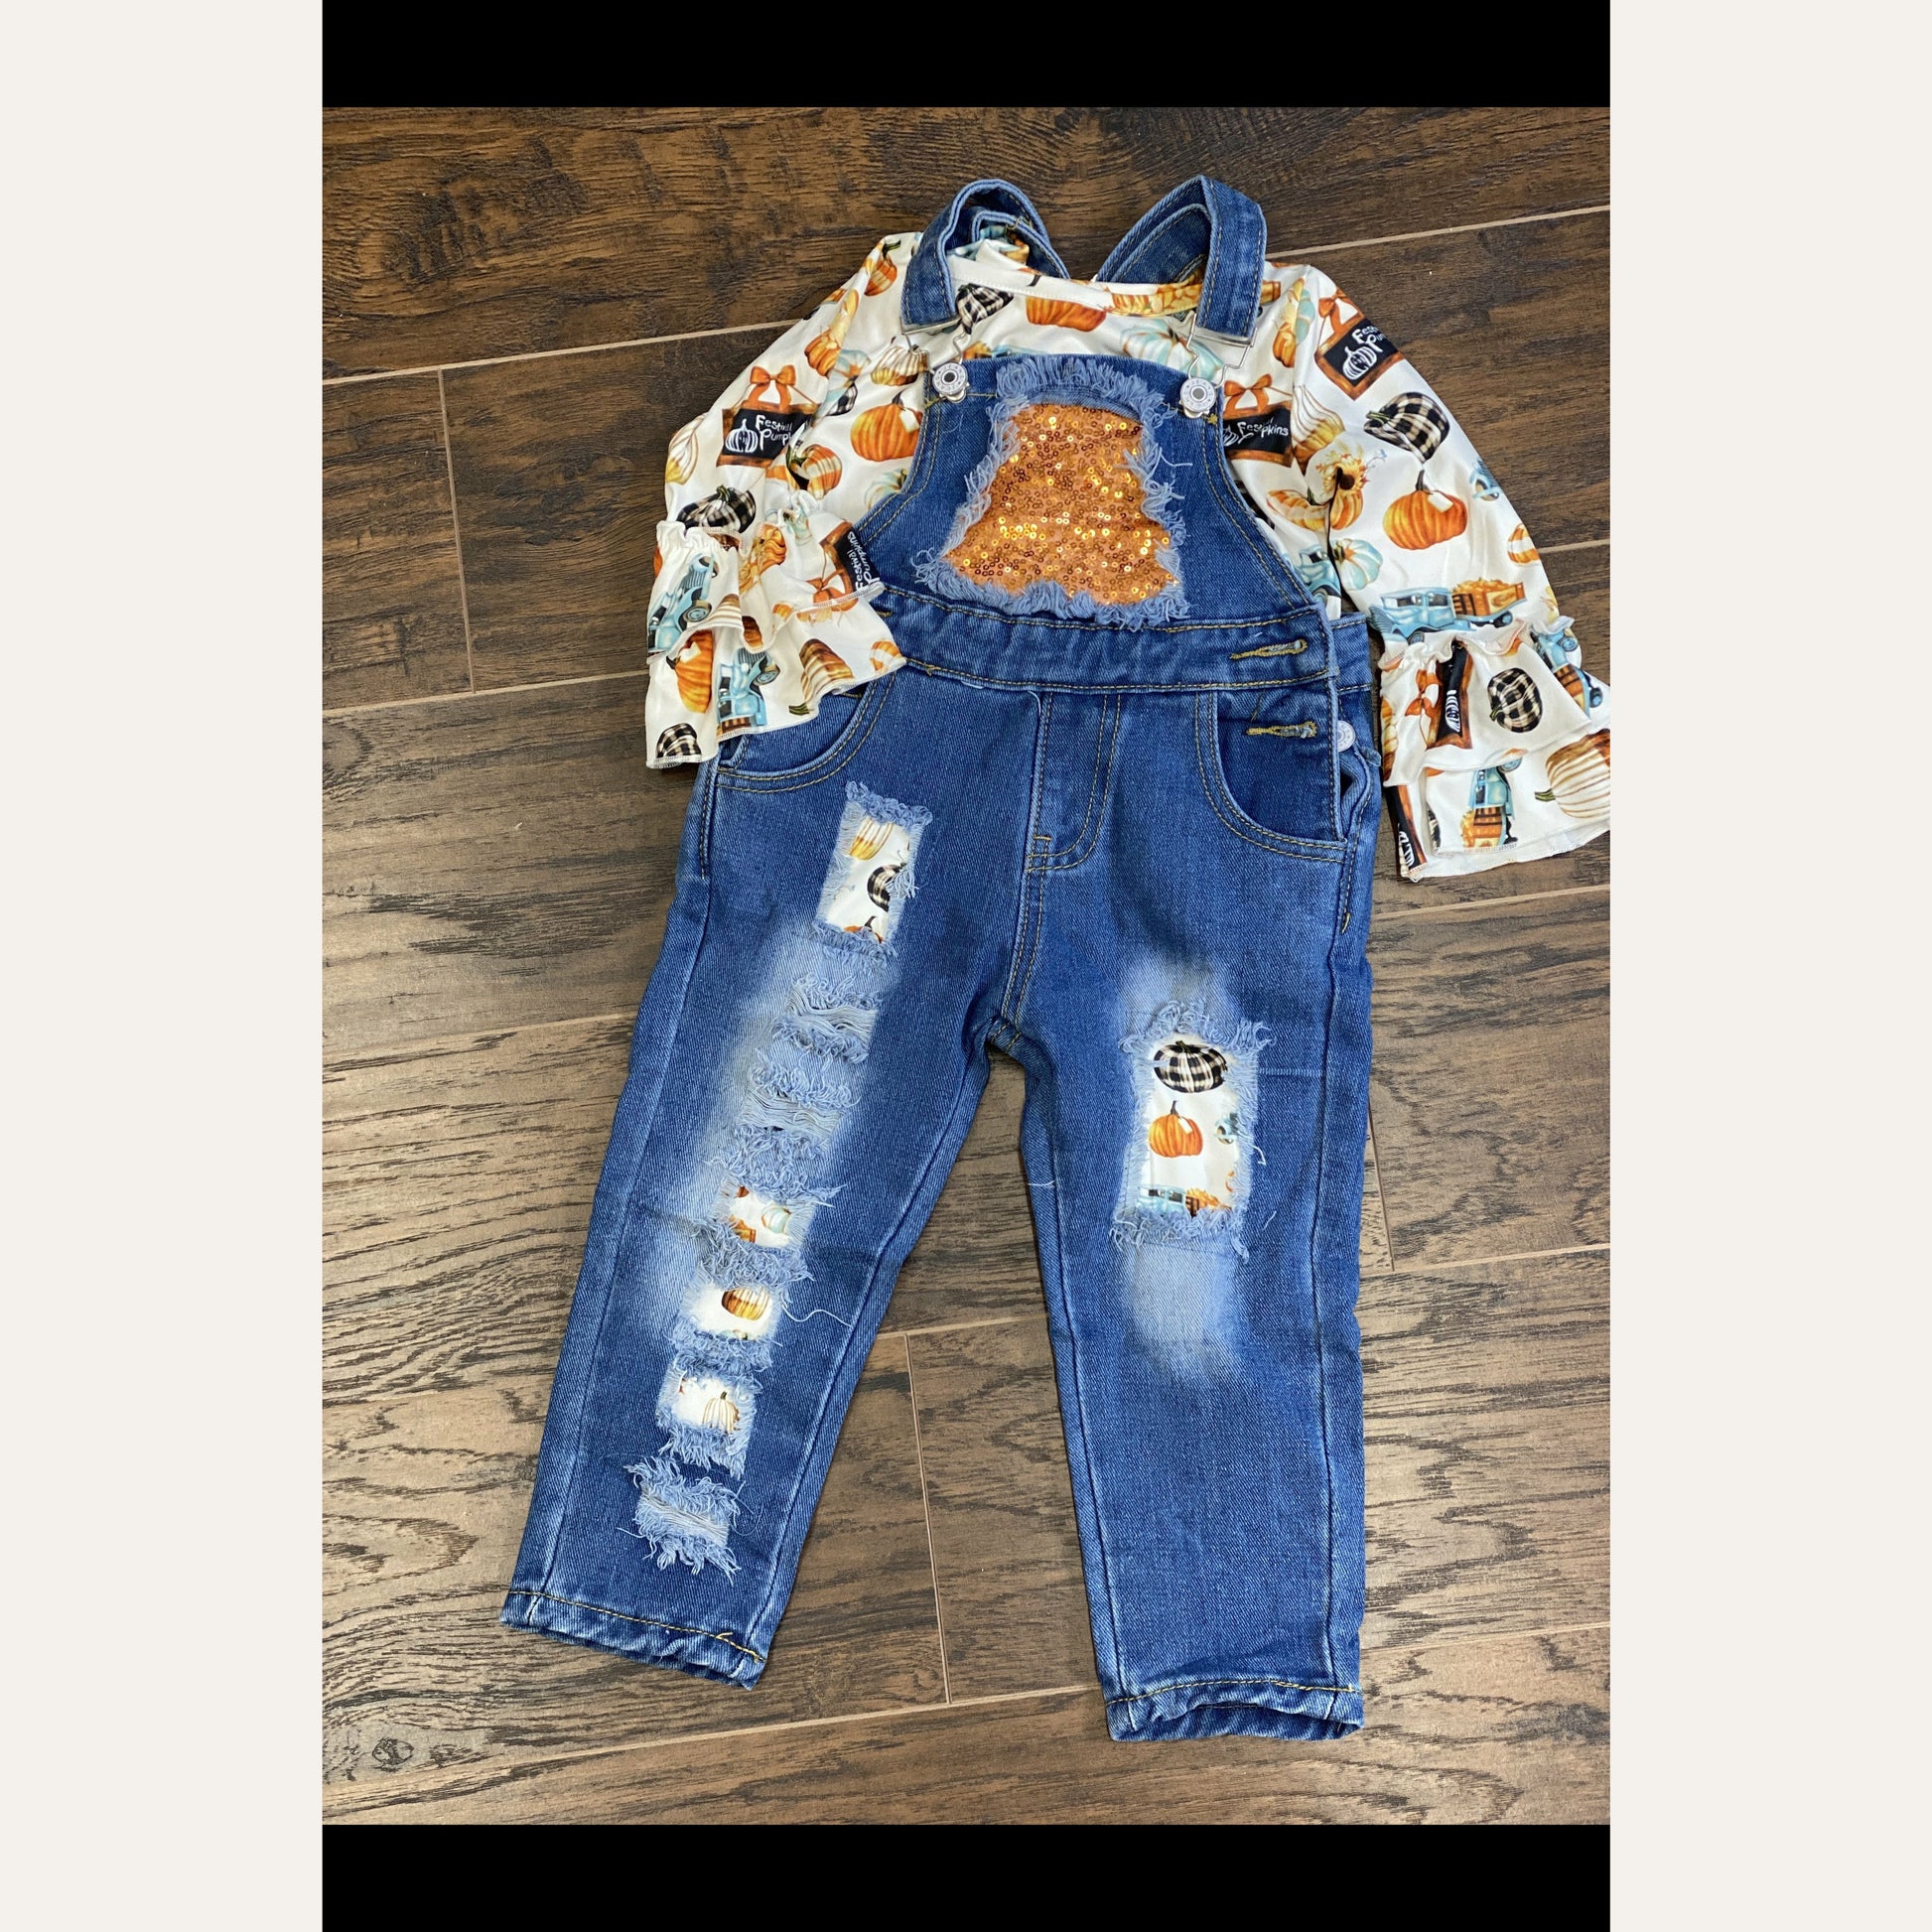 This maize yellow ruffle sleeve top features a vibrant pumpkin patch design. We recommend pairing it with our matching pumpkin patch overalls.  In-store ready to ship or try on!